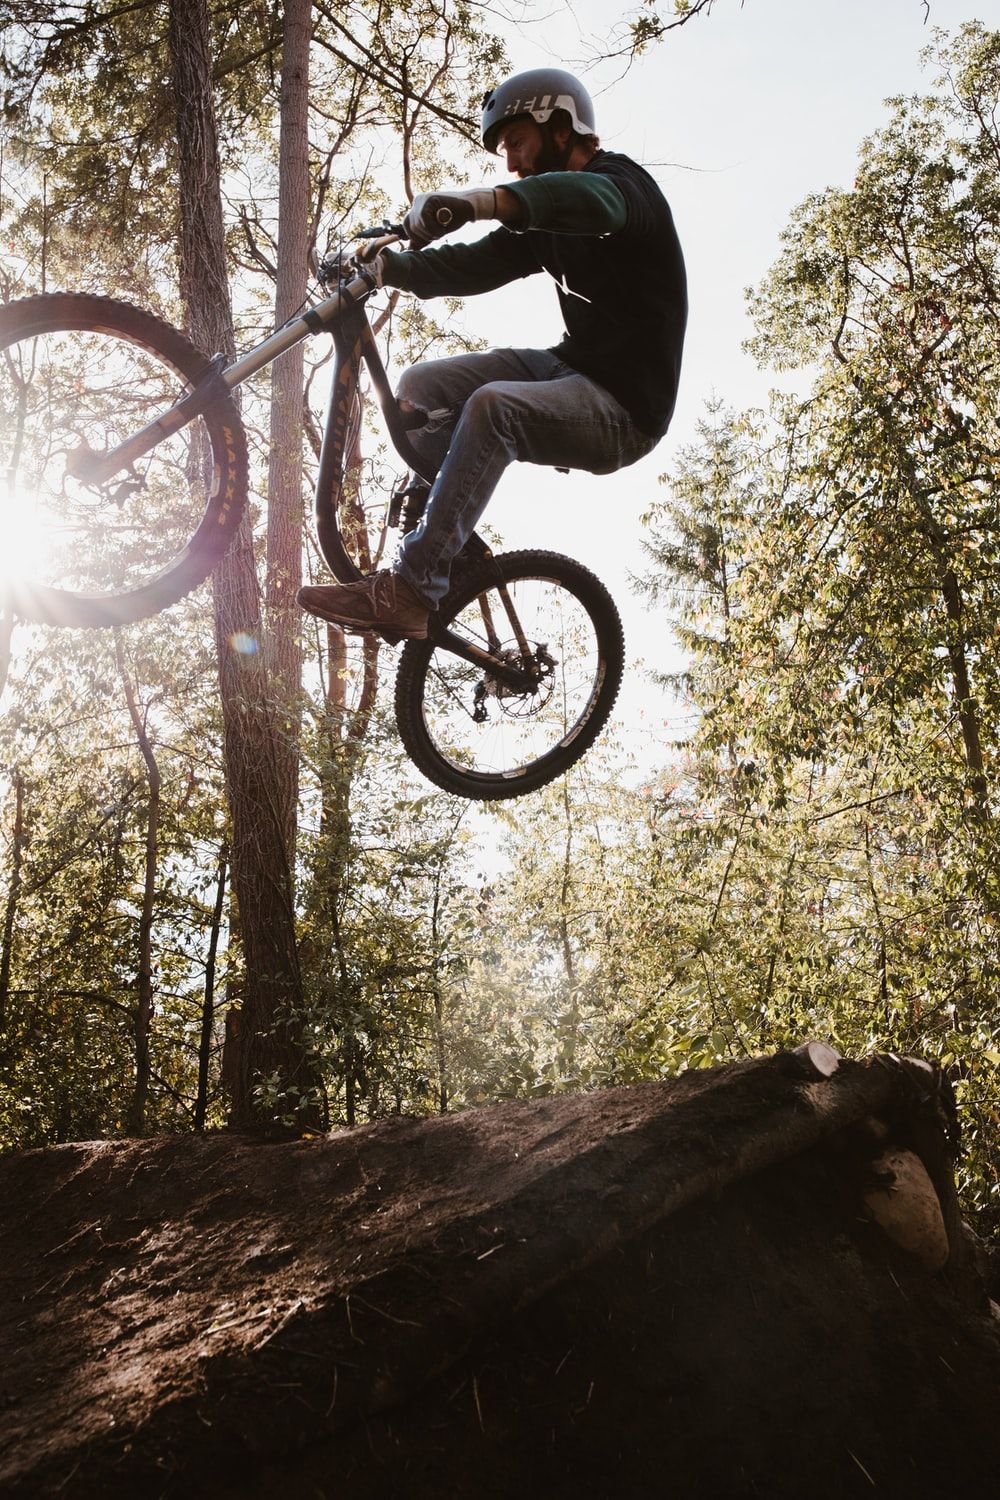 Bike Jump Picture. Download Free Image